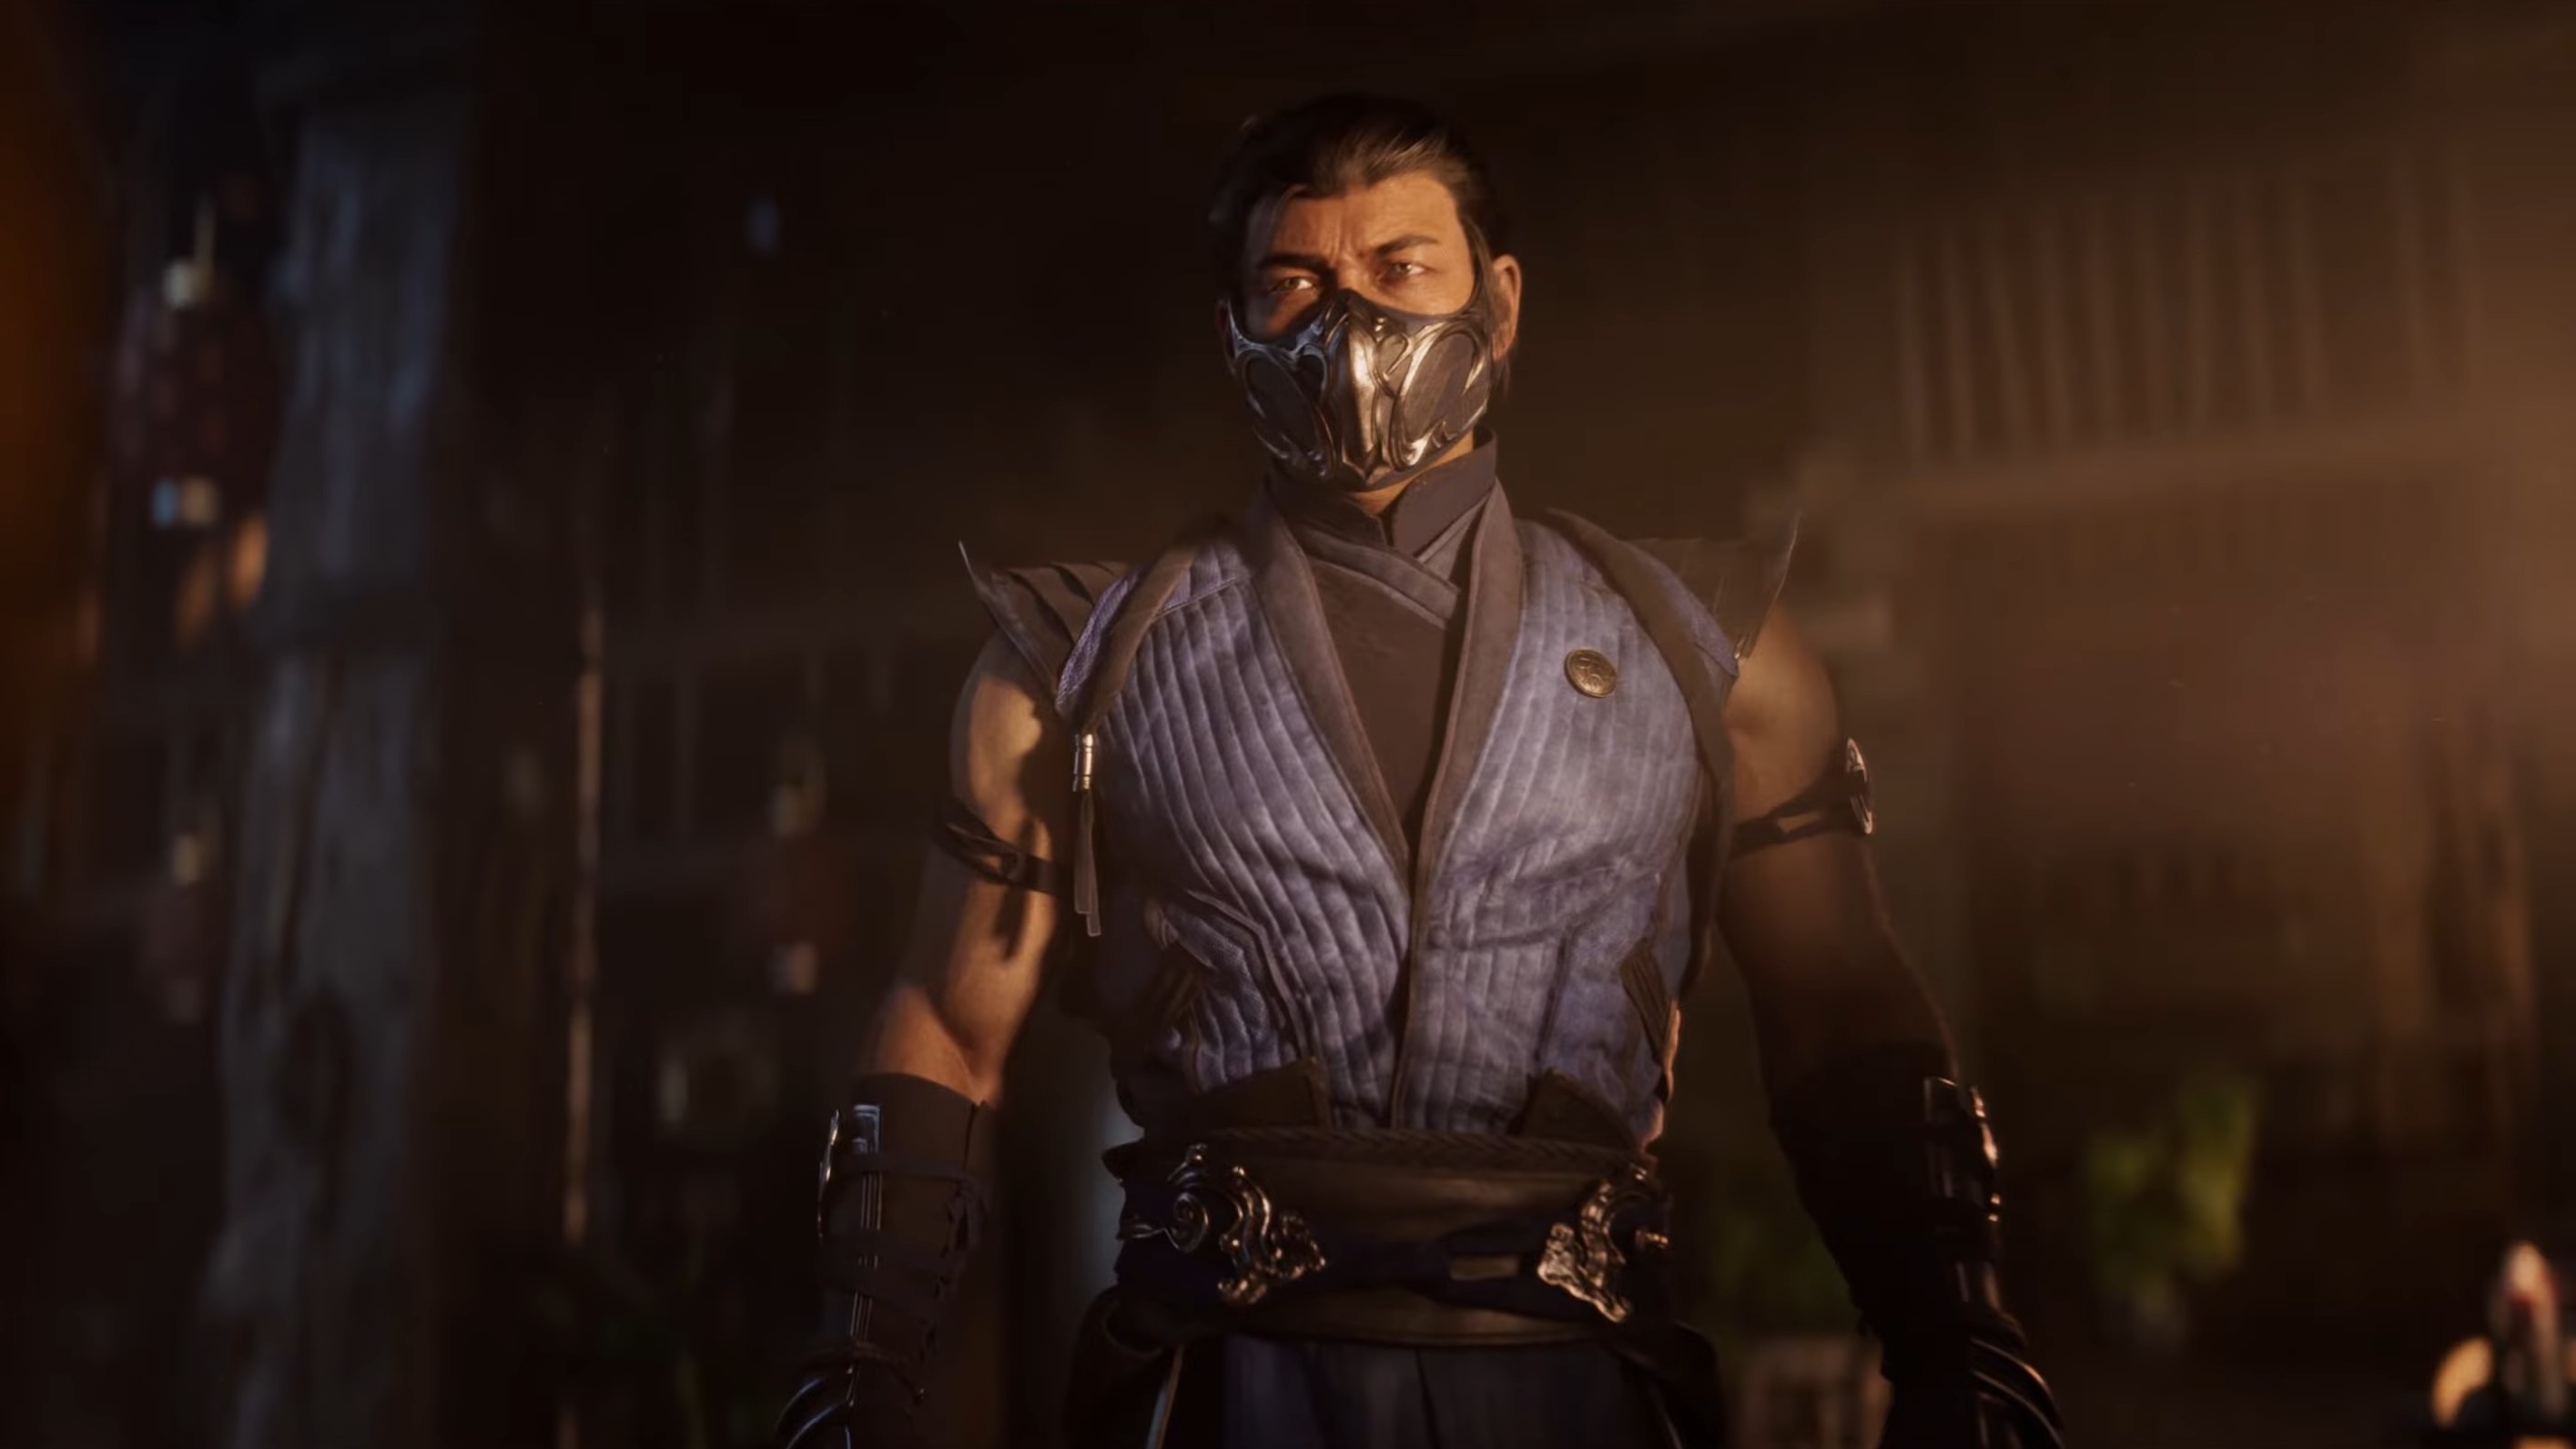 Mortal Kombat 12 announced for 2023 during - of all things - a